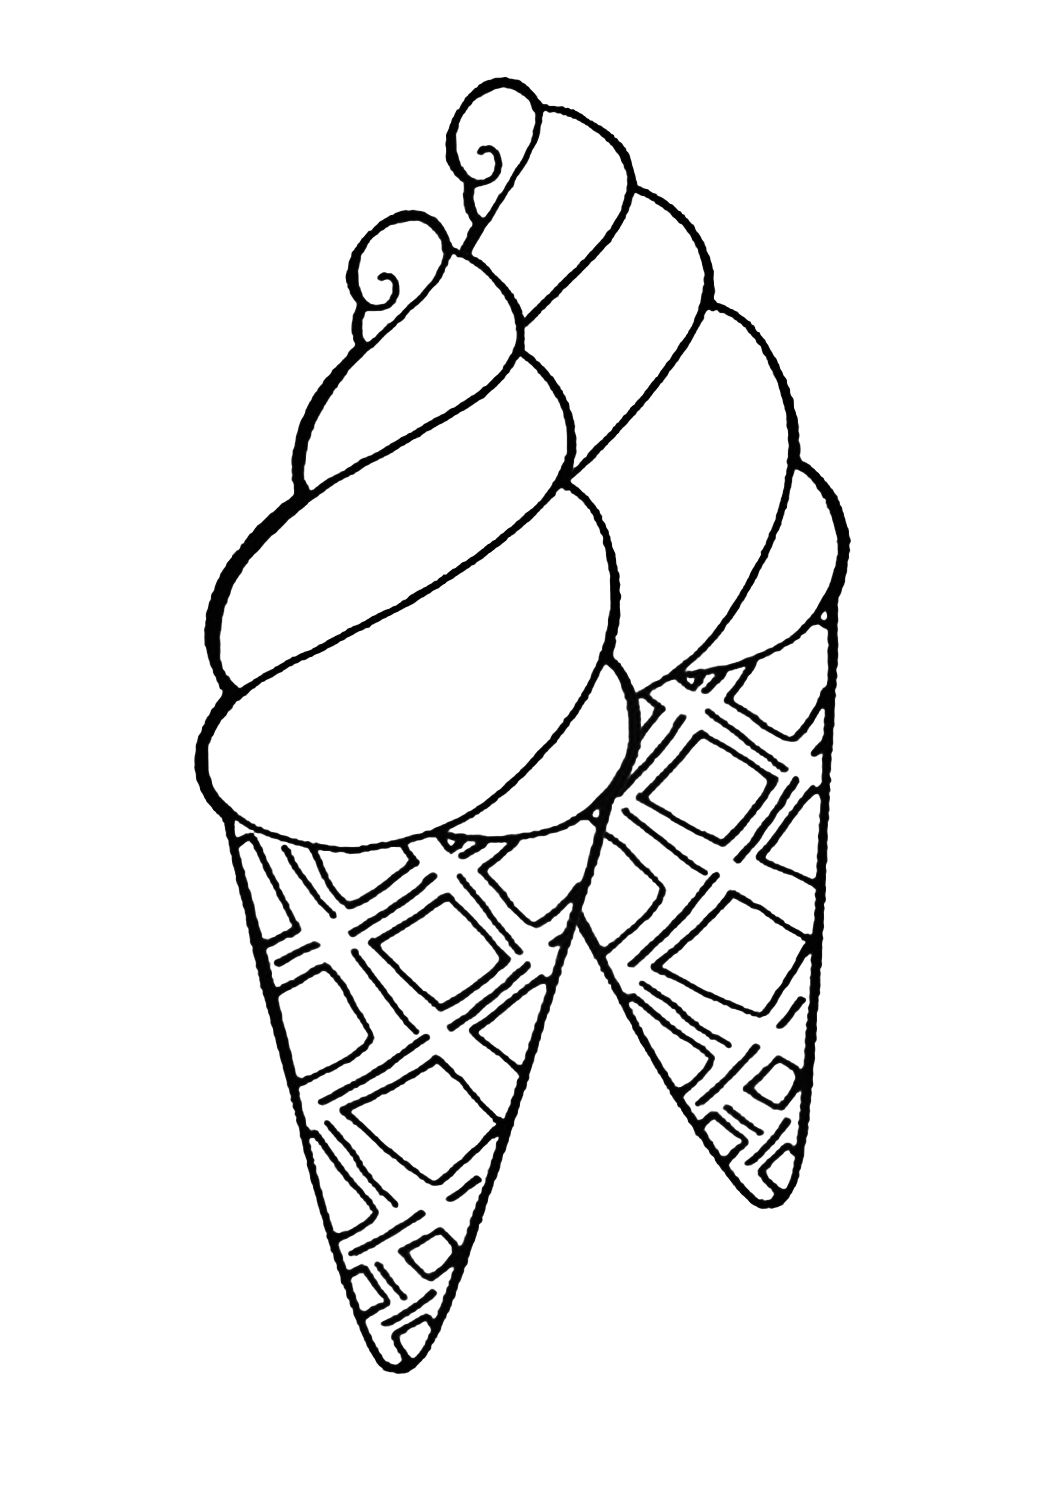 Download Coloring Pages Pin By Holly On Holiday Crafts Ideas Ice Cream Coloring Pages Pictures